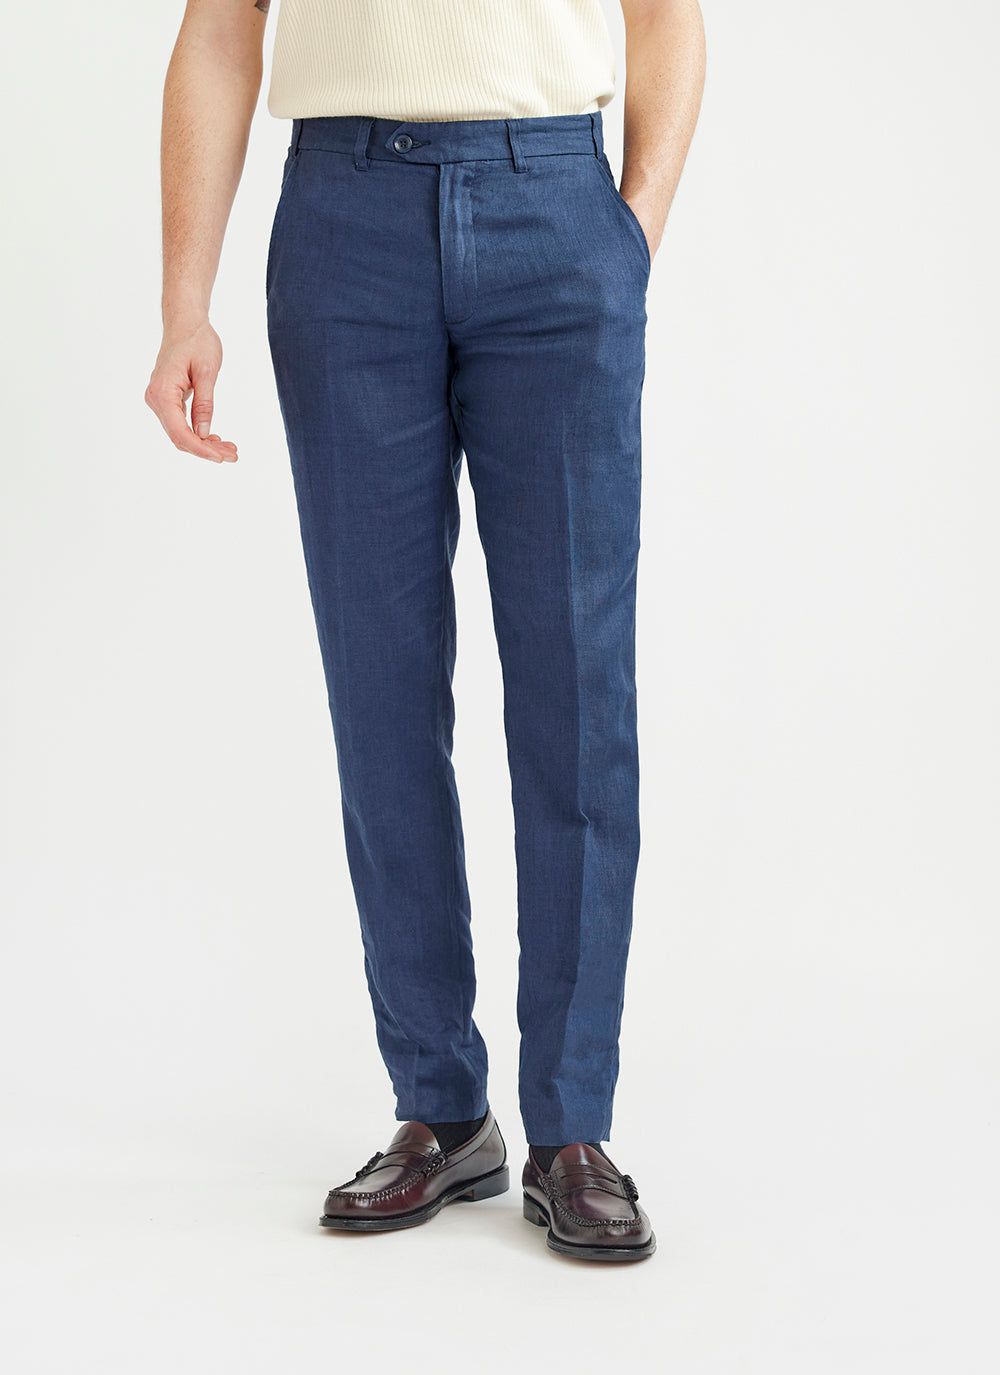 Mens Tailored Trousers  Buy Mens Trousers Online  Hockerty